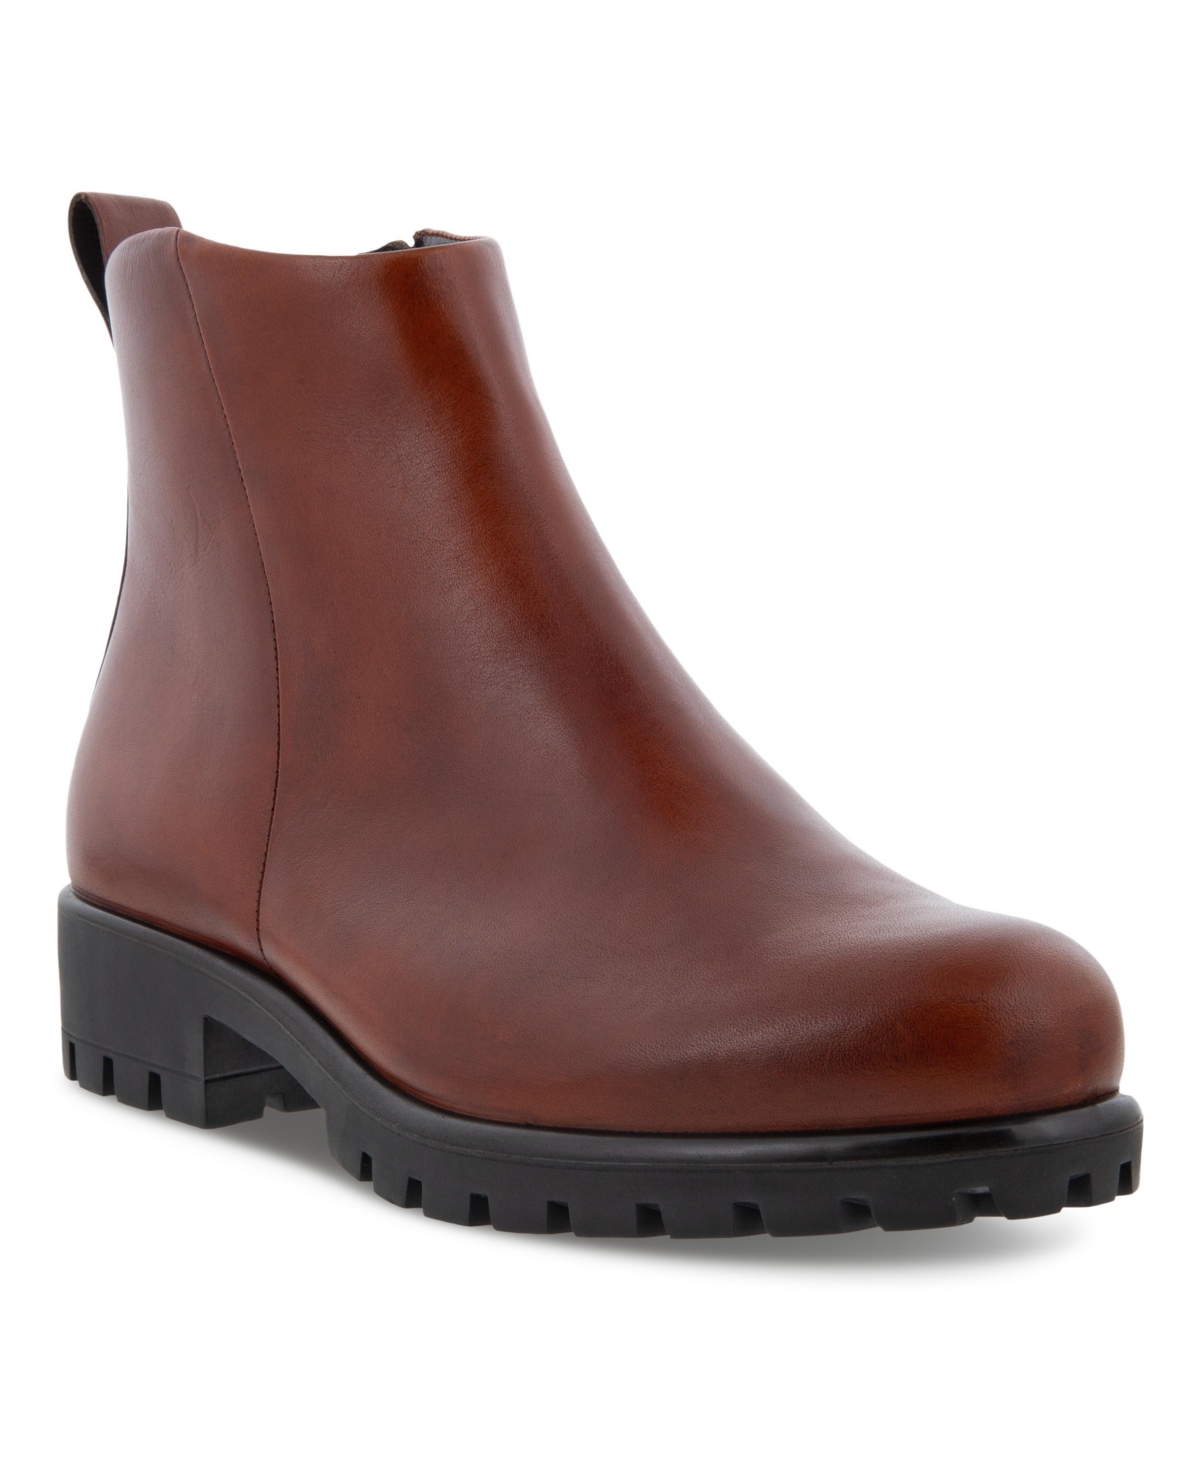 UPC 194890942356 product image for Ecco Women's Modtray Ankle Leather Boot Women's Shoes | upcitemdb.com